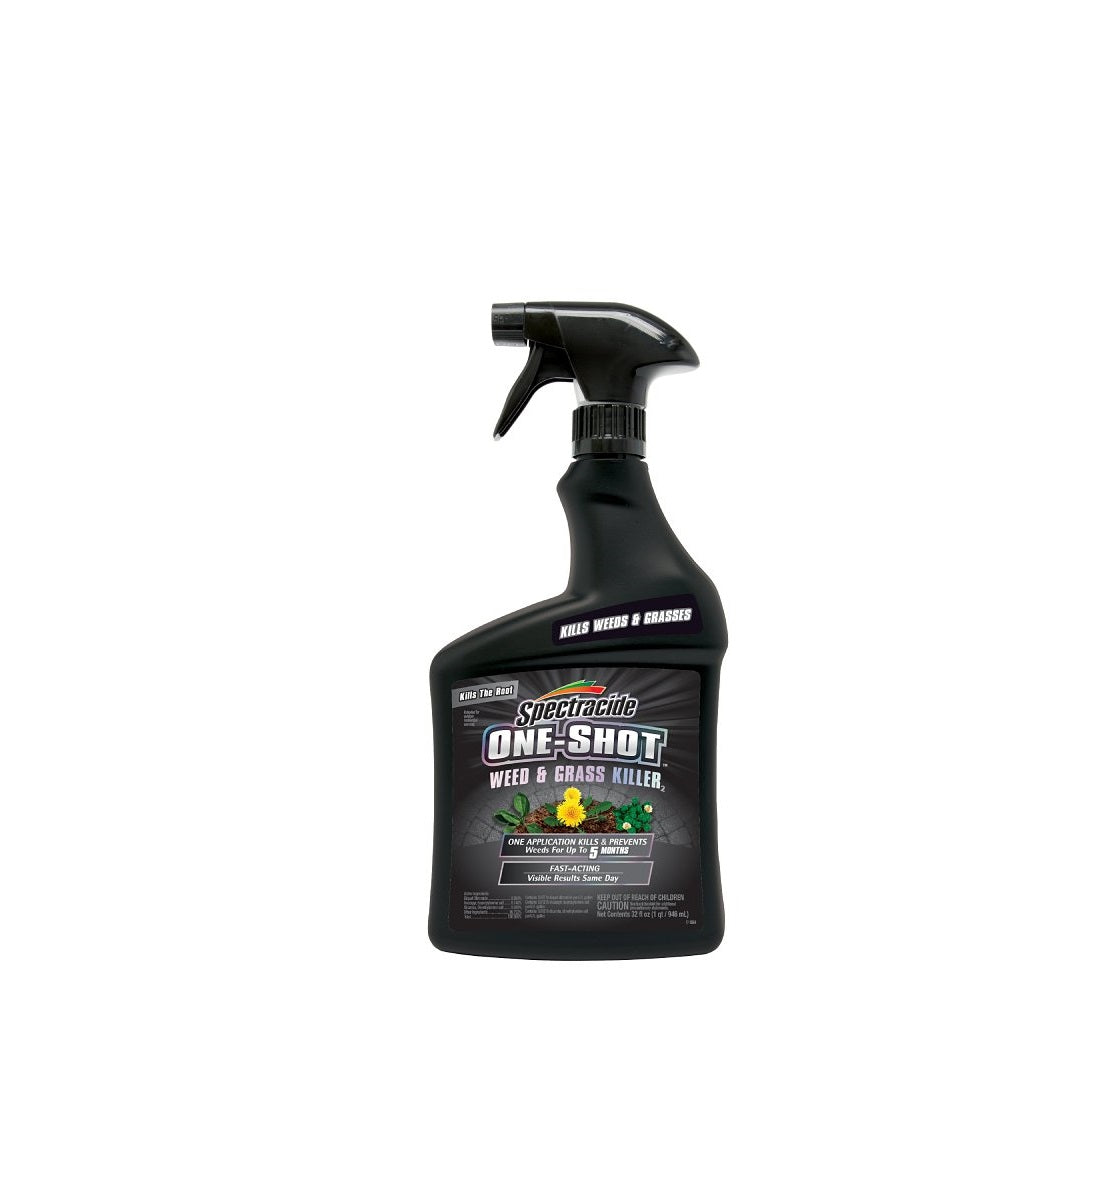 Spectracide HG-67184 ONE-SHOT Weed and Grass Killer, 32 Ounce